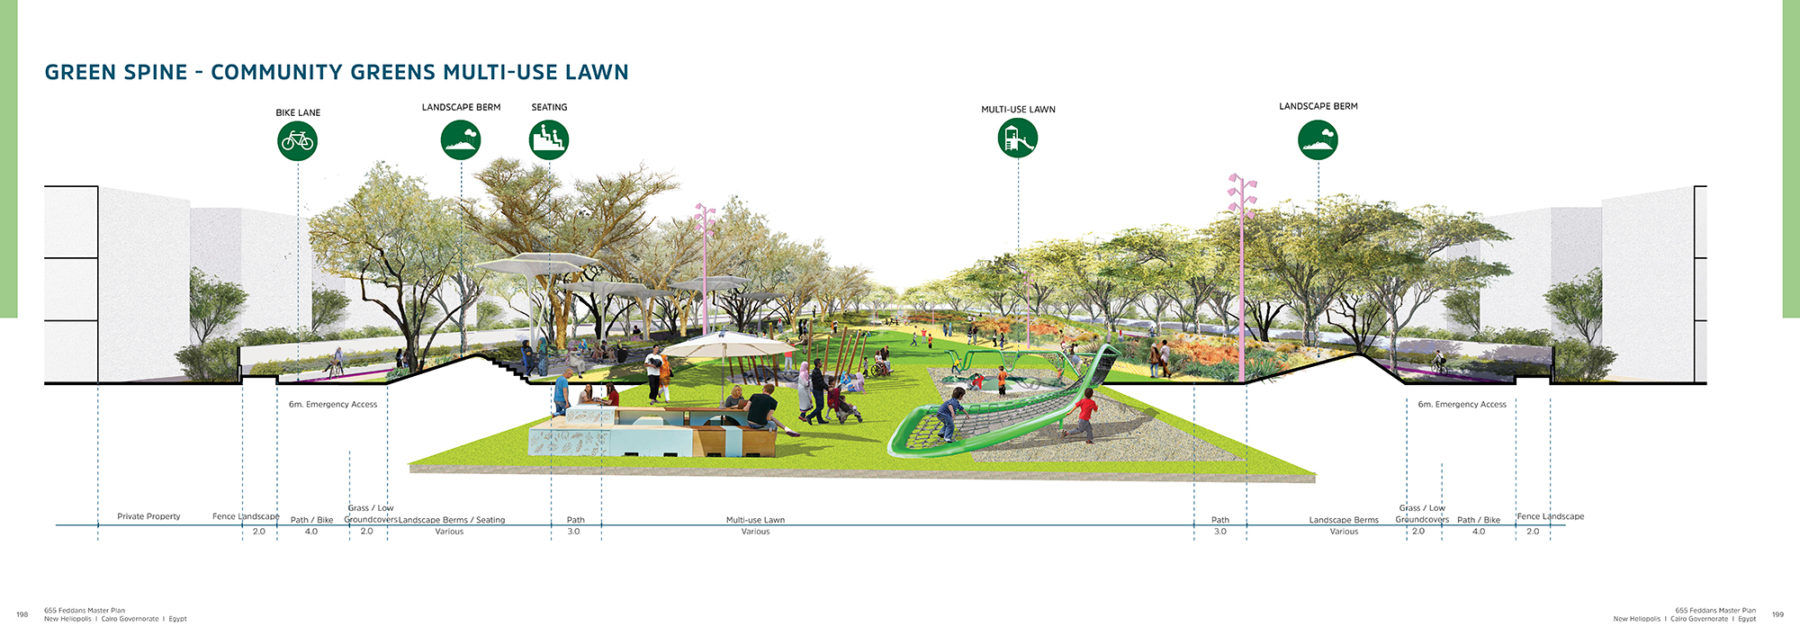 section diagram of community green space